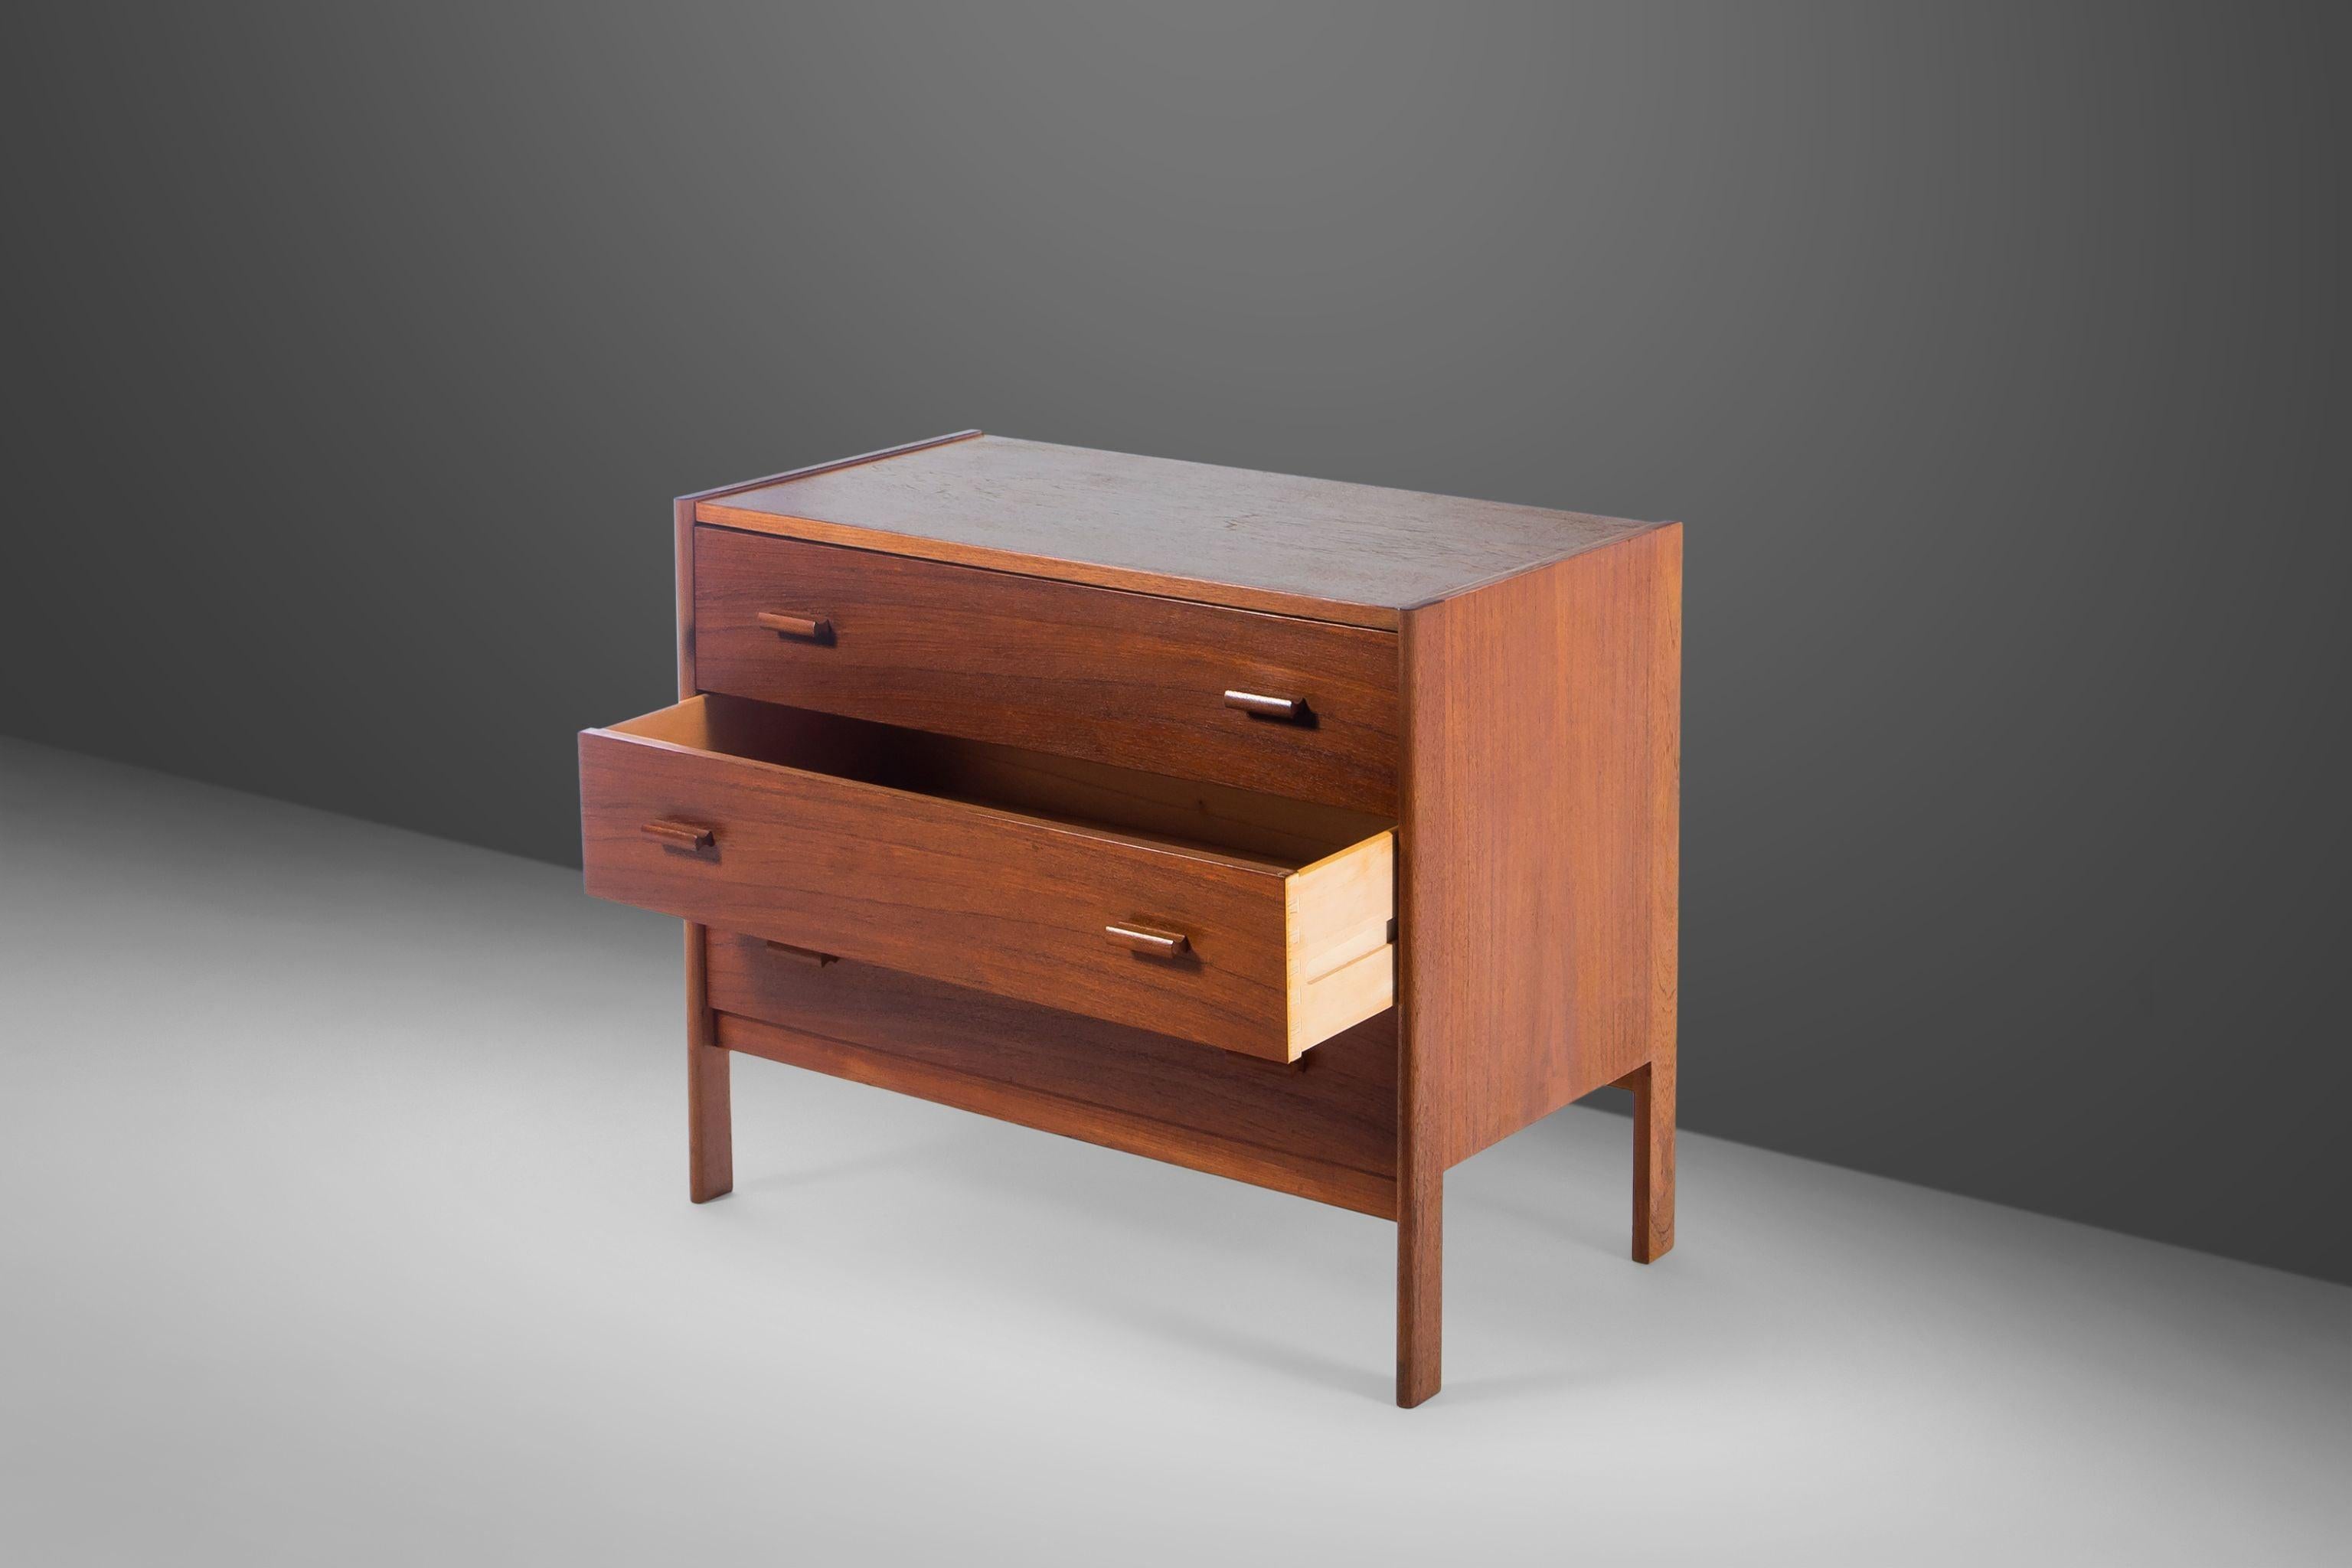 Danish Modern Chest of Drawers / Three '3' Drawer Dresser by Vitre, c. 1970s For Sale 2